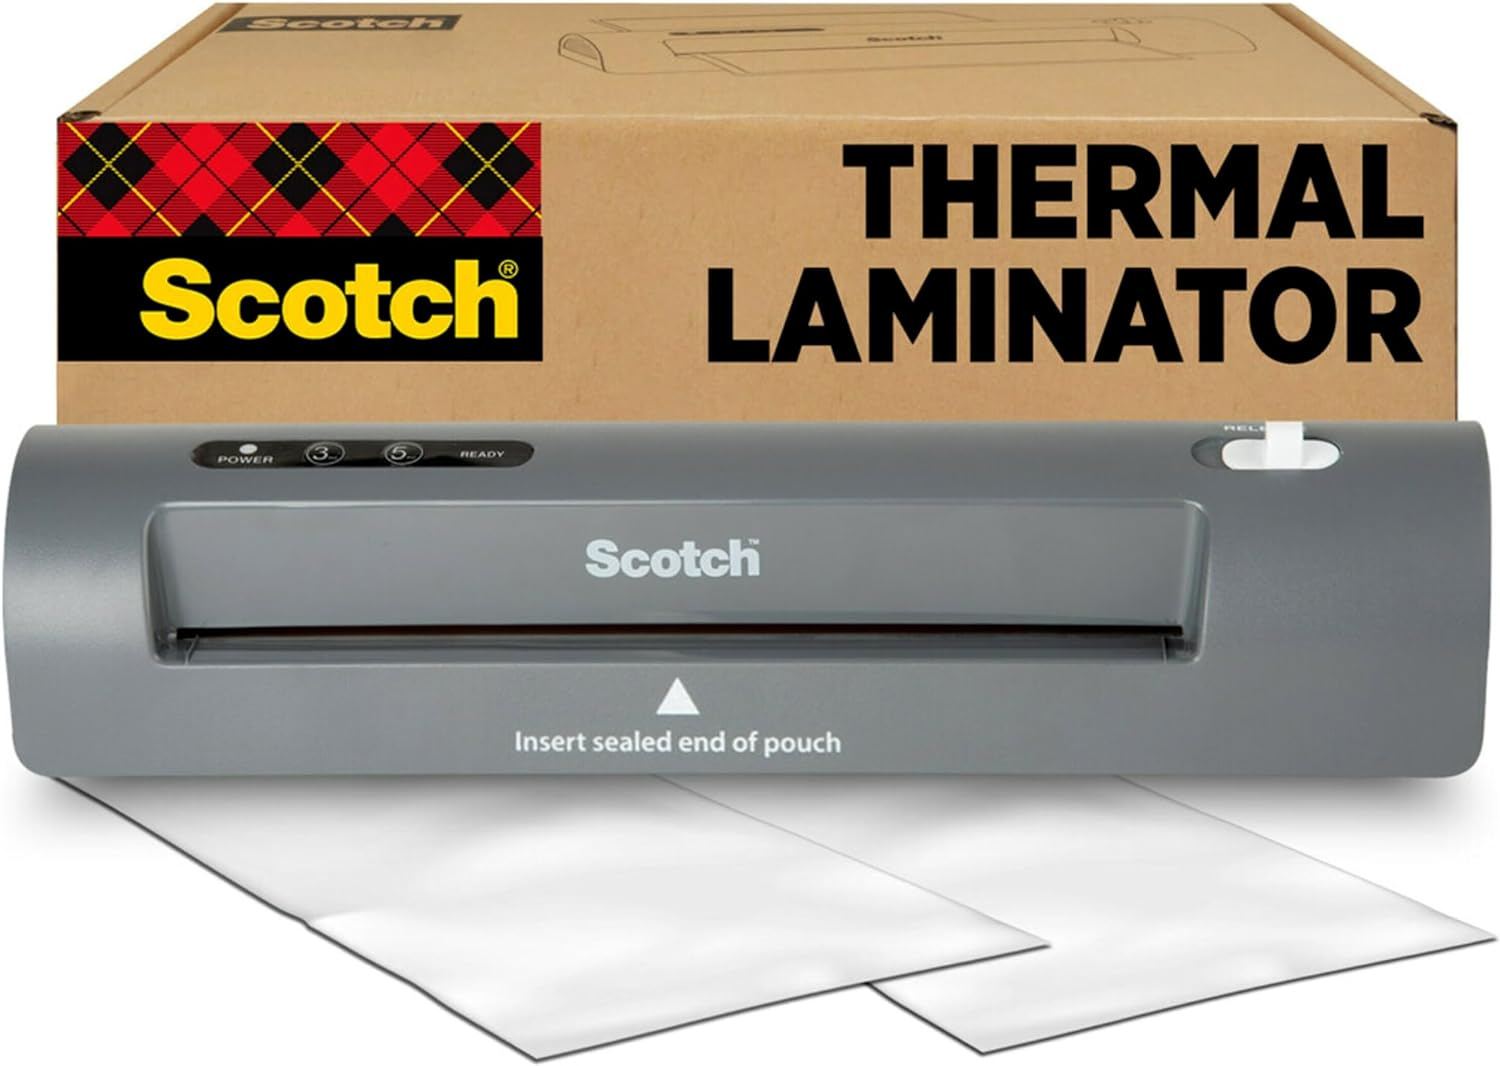 Scotch Thermal Laminator, 2 Roller System for a Professional Finish $28.47